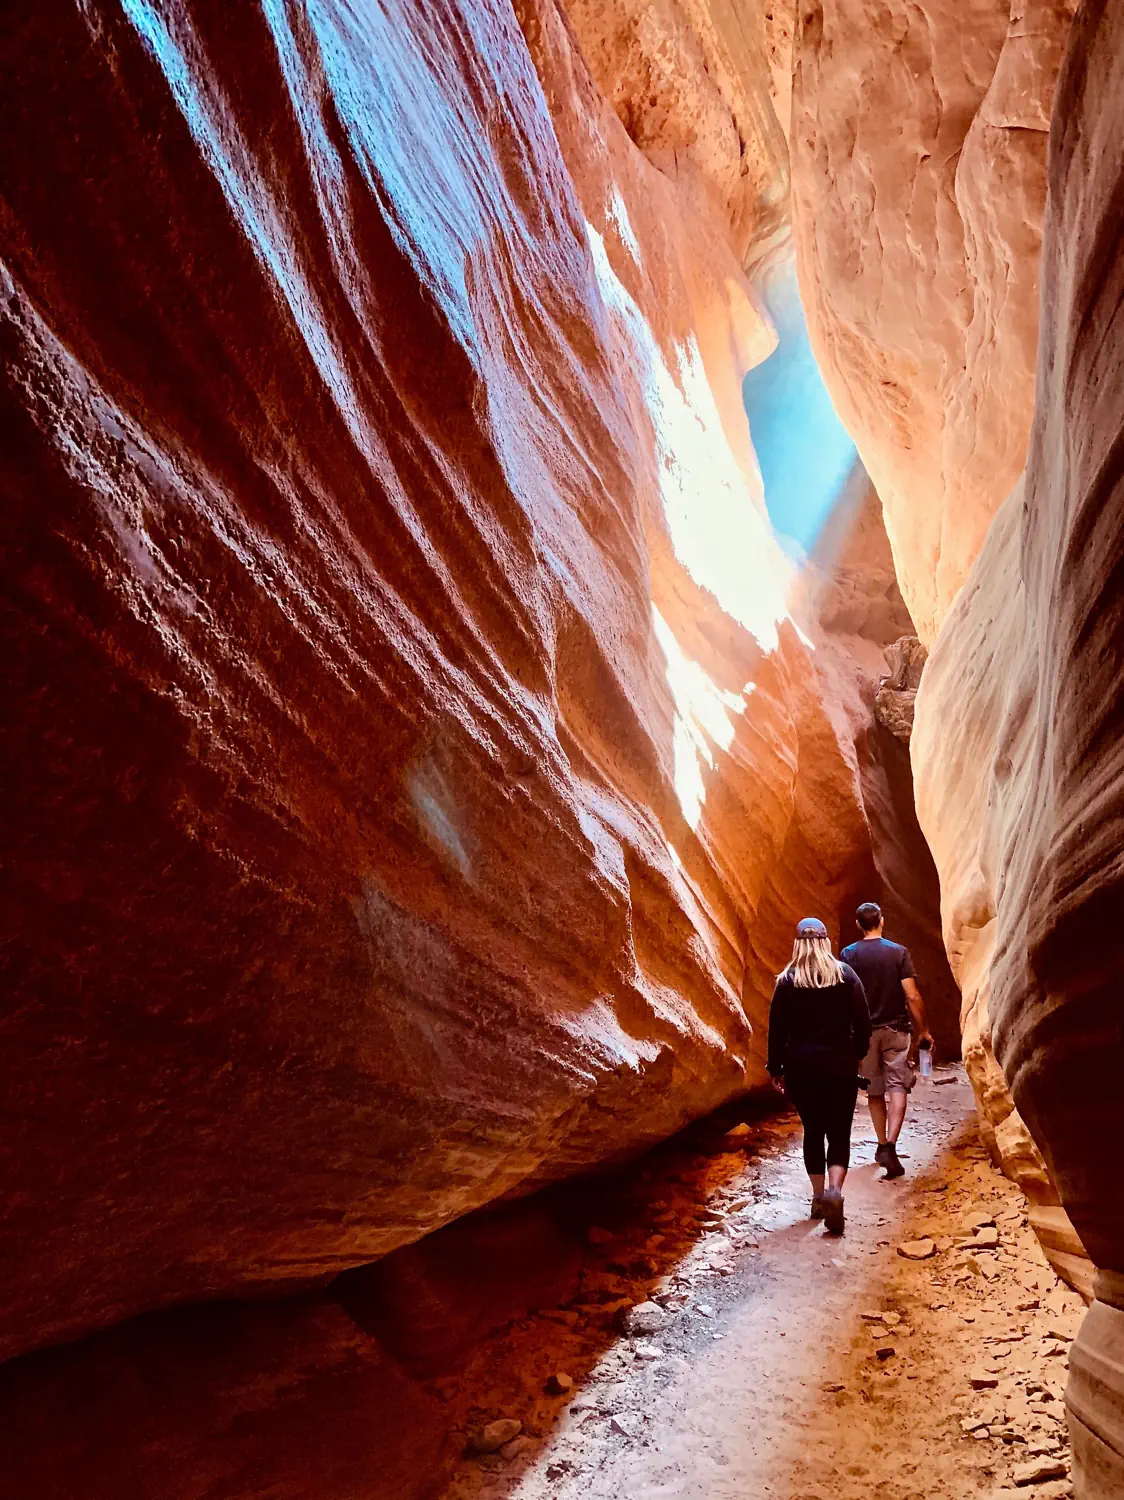 Hiking through a slot canyon during our excursion